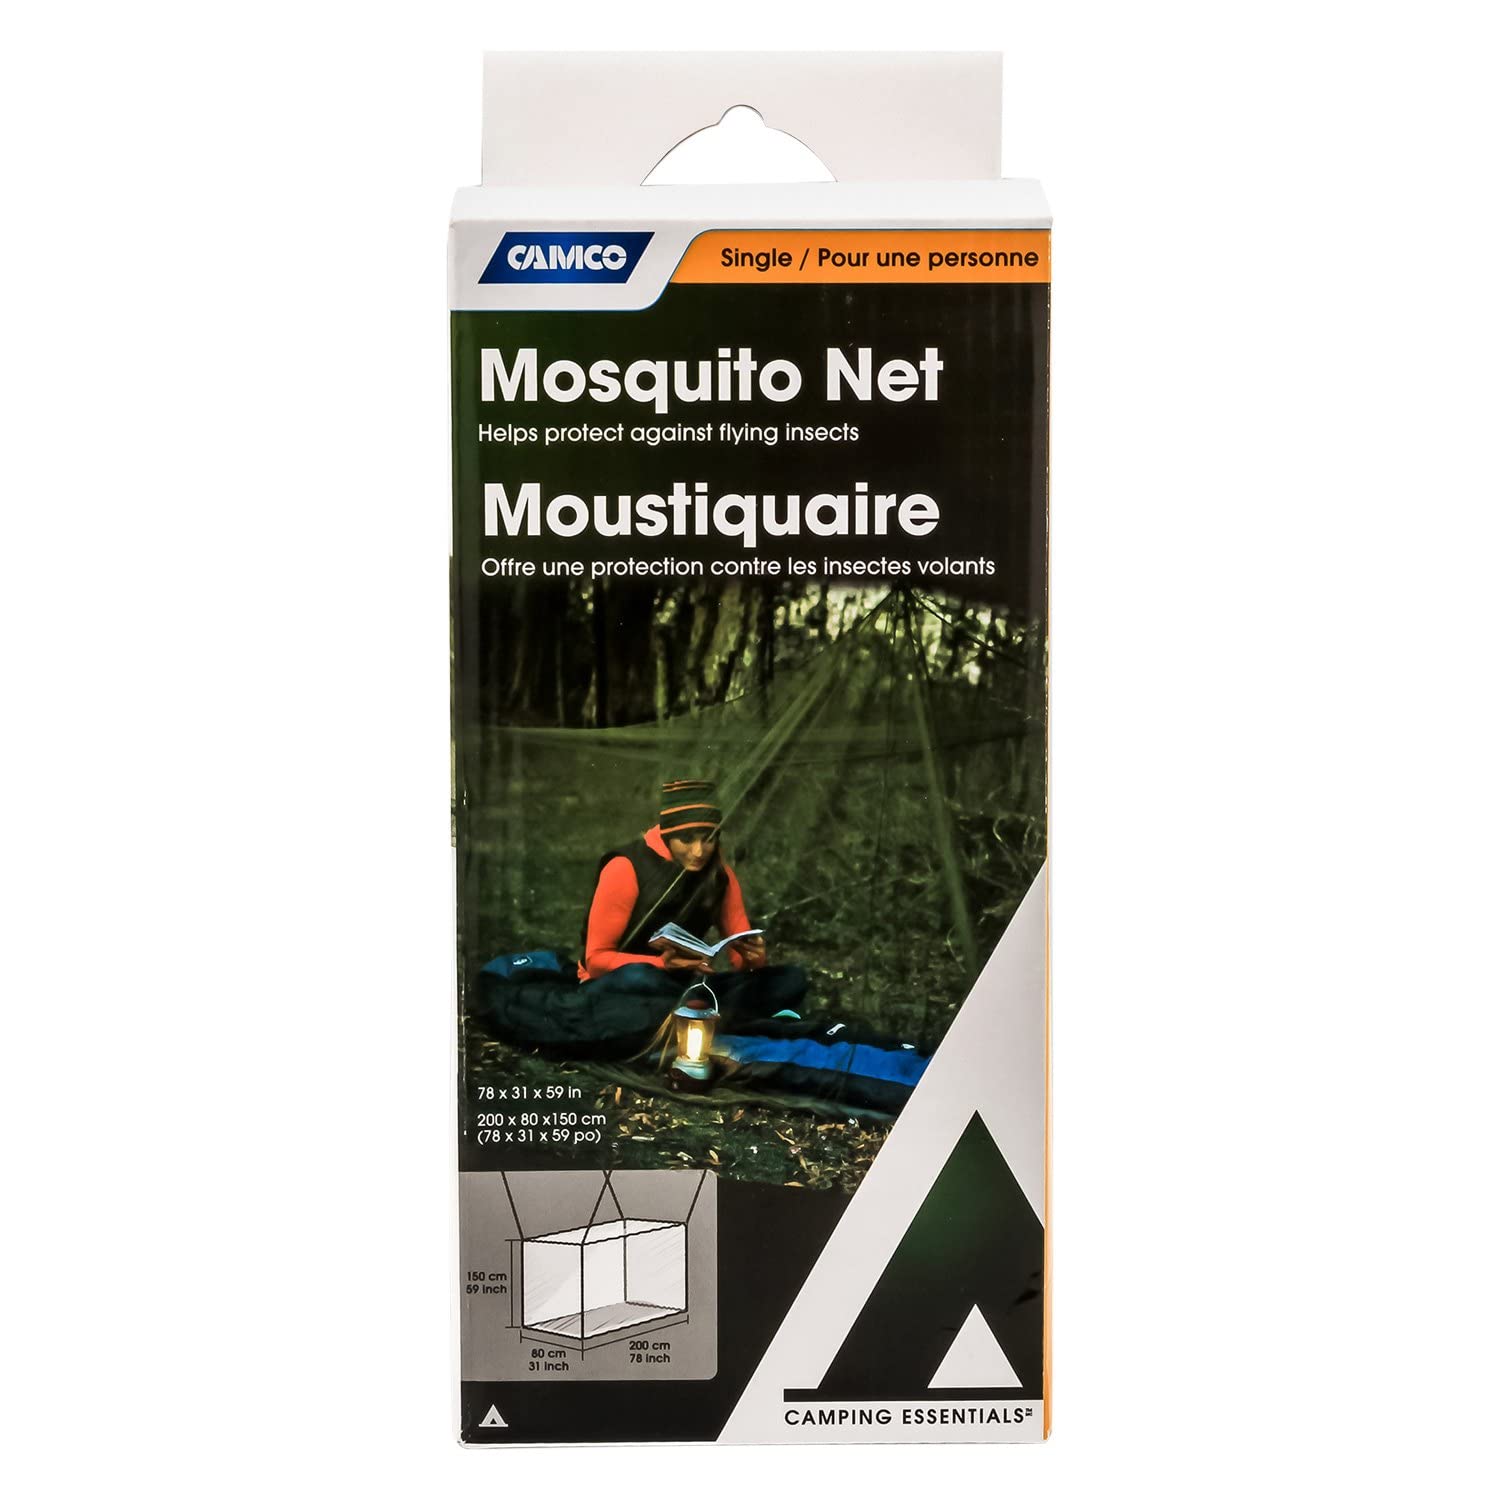 Camco 51366 Mosquito Net with Storage Bag